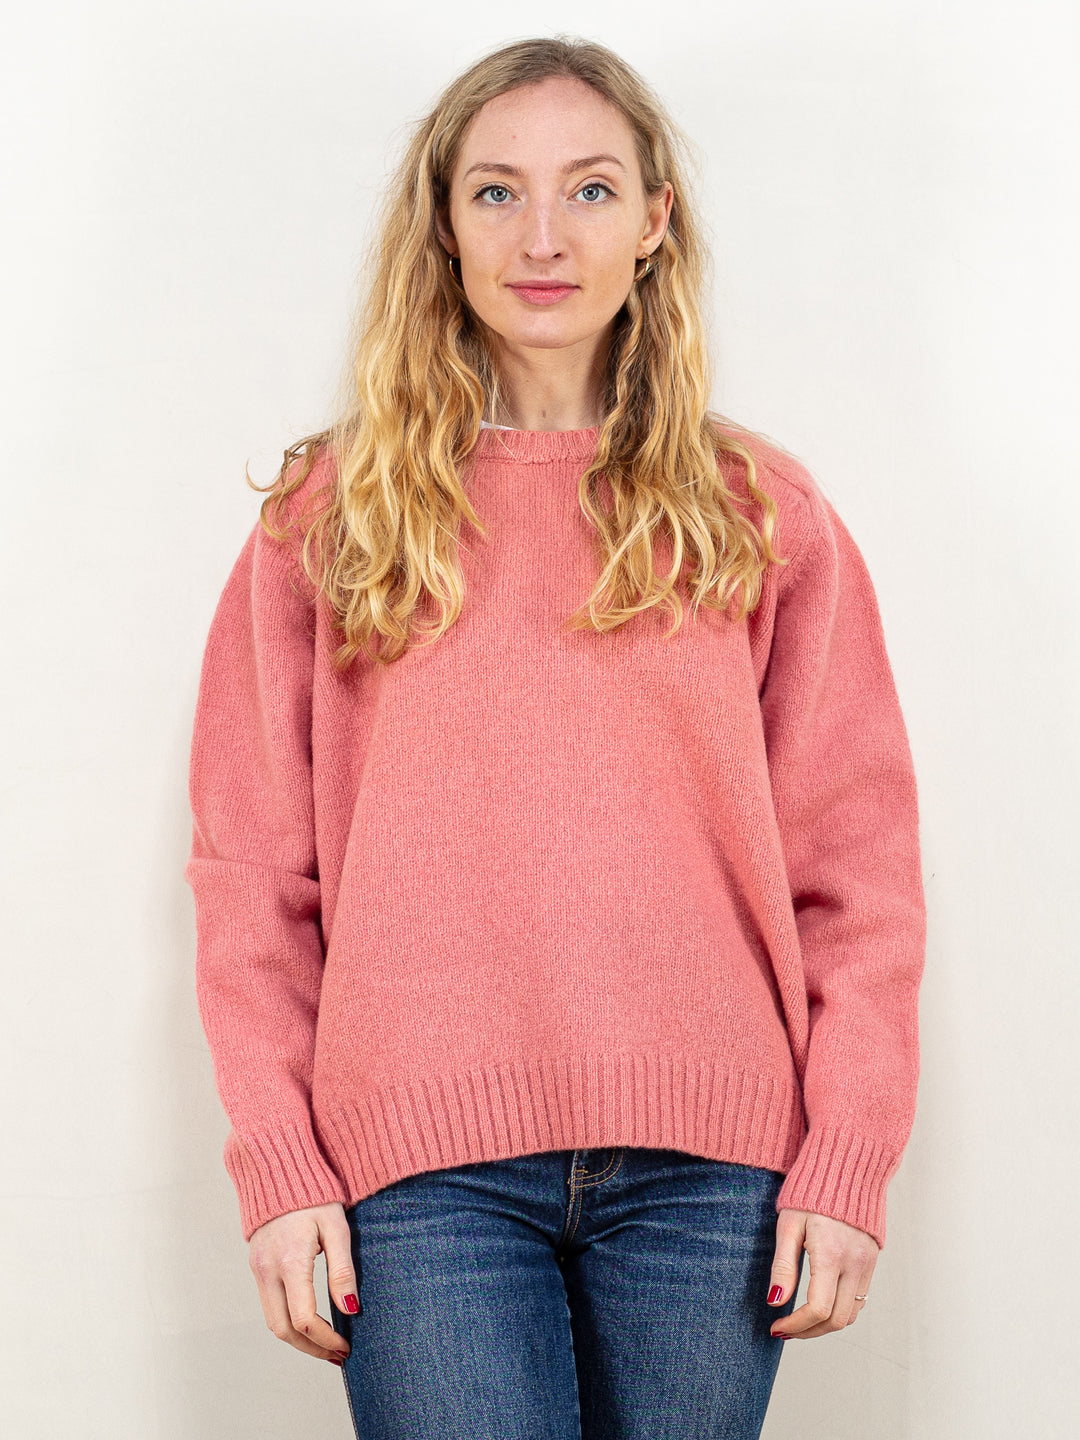 Wool Knit Sweater vintage 90's apres ski pink wool pullover crew neck sweater casual everyday women jumper sustainable size extra large XL